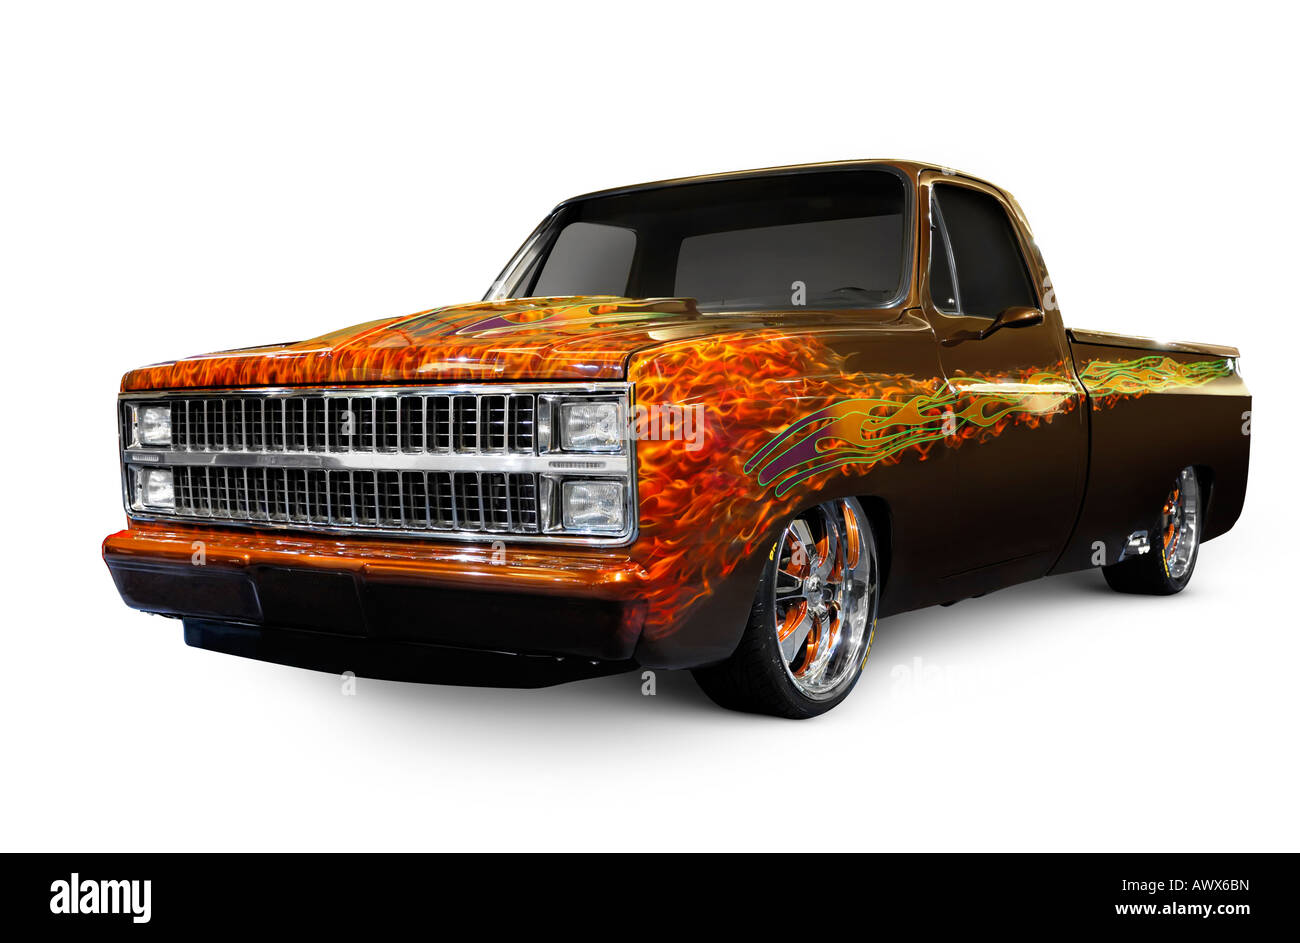 License and prints at MaximImages.com - Hot Rod Chevrolet Scotsdale 1978 retro pickup truck Stock Photo